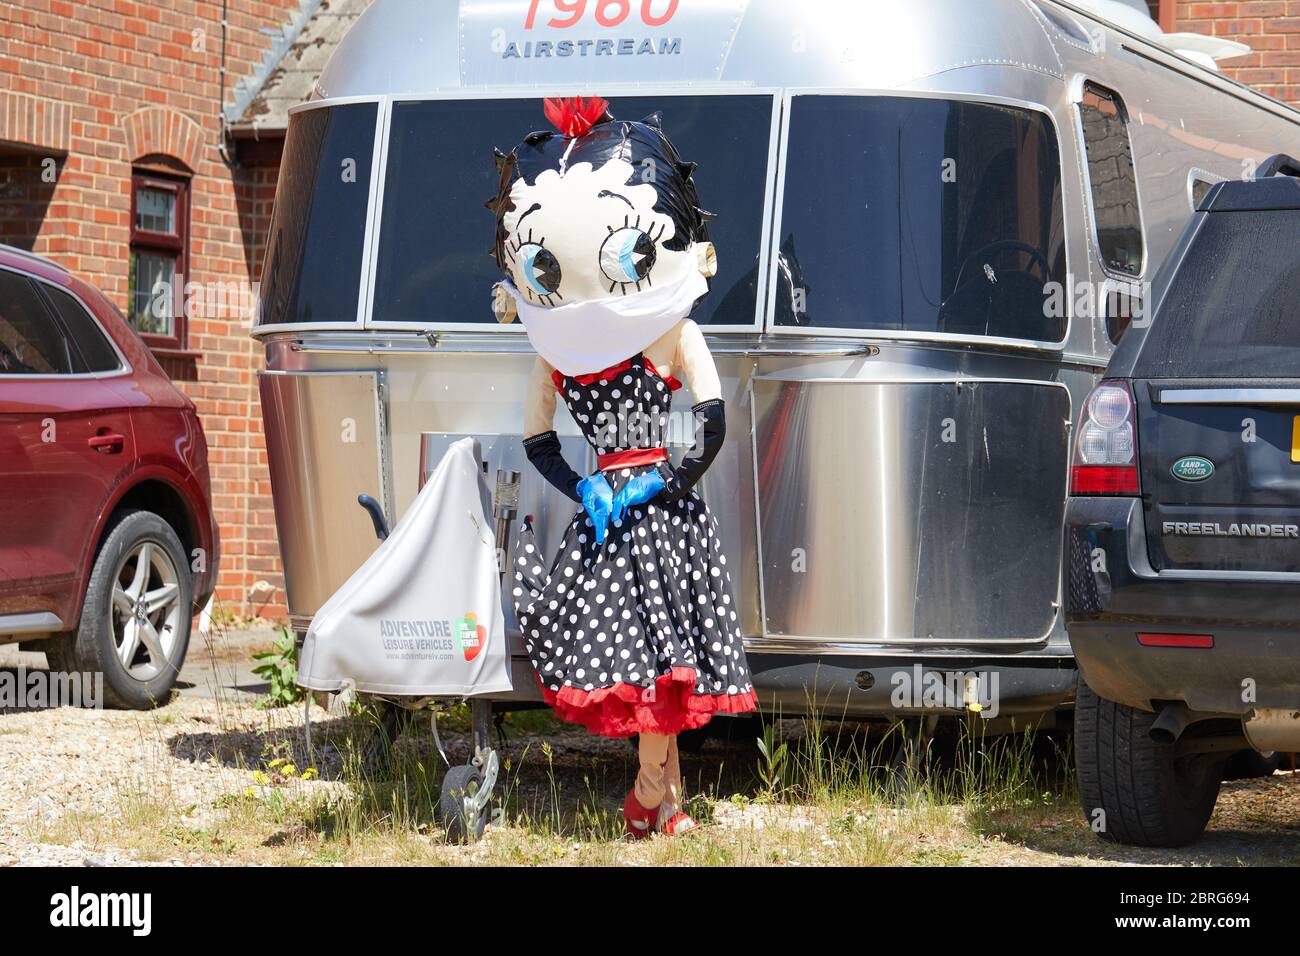 Sandleheath, UK. - May 20, 2020: A Betty Boop scarecrow wearing a face mask. The Hampshire village of Sandleheath holds an annual charity scarecrow competition. Many entries this year adopt a coronavirus theme. Stock Photo